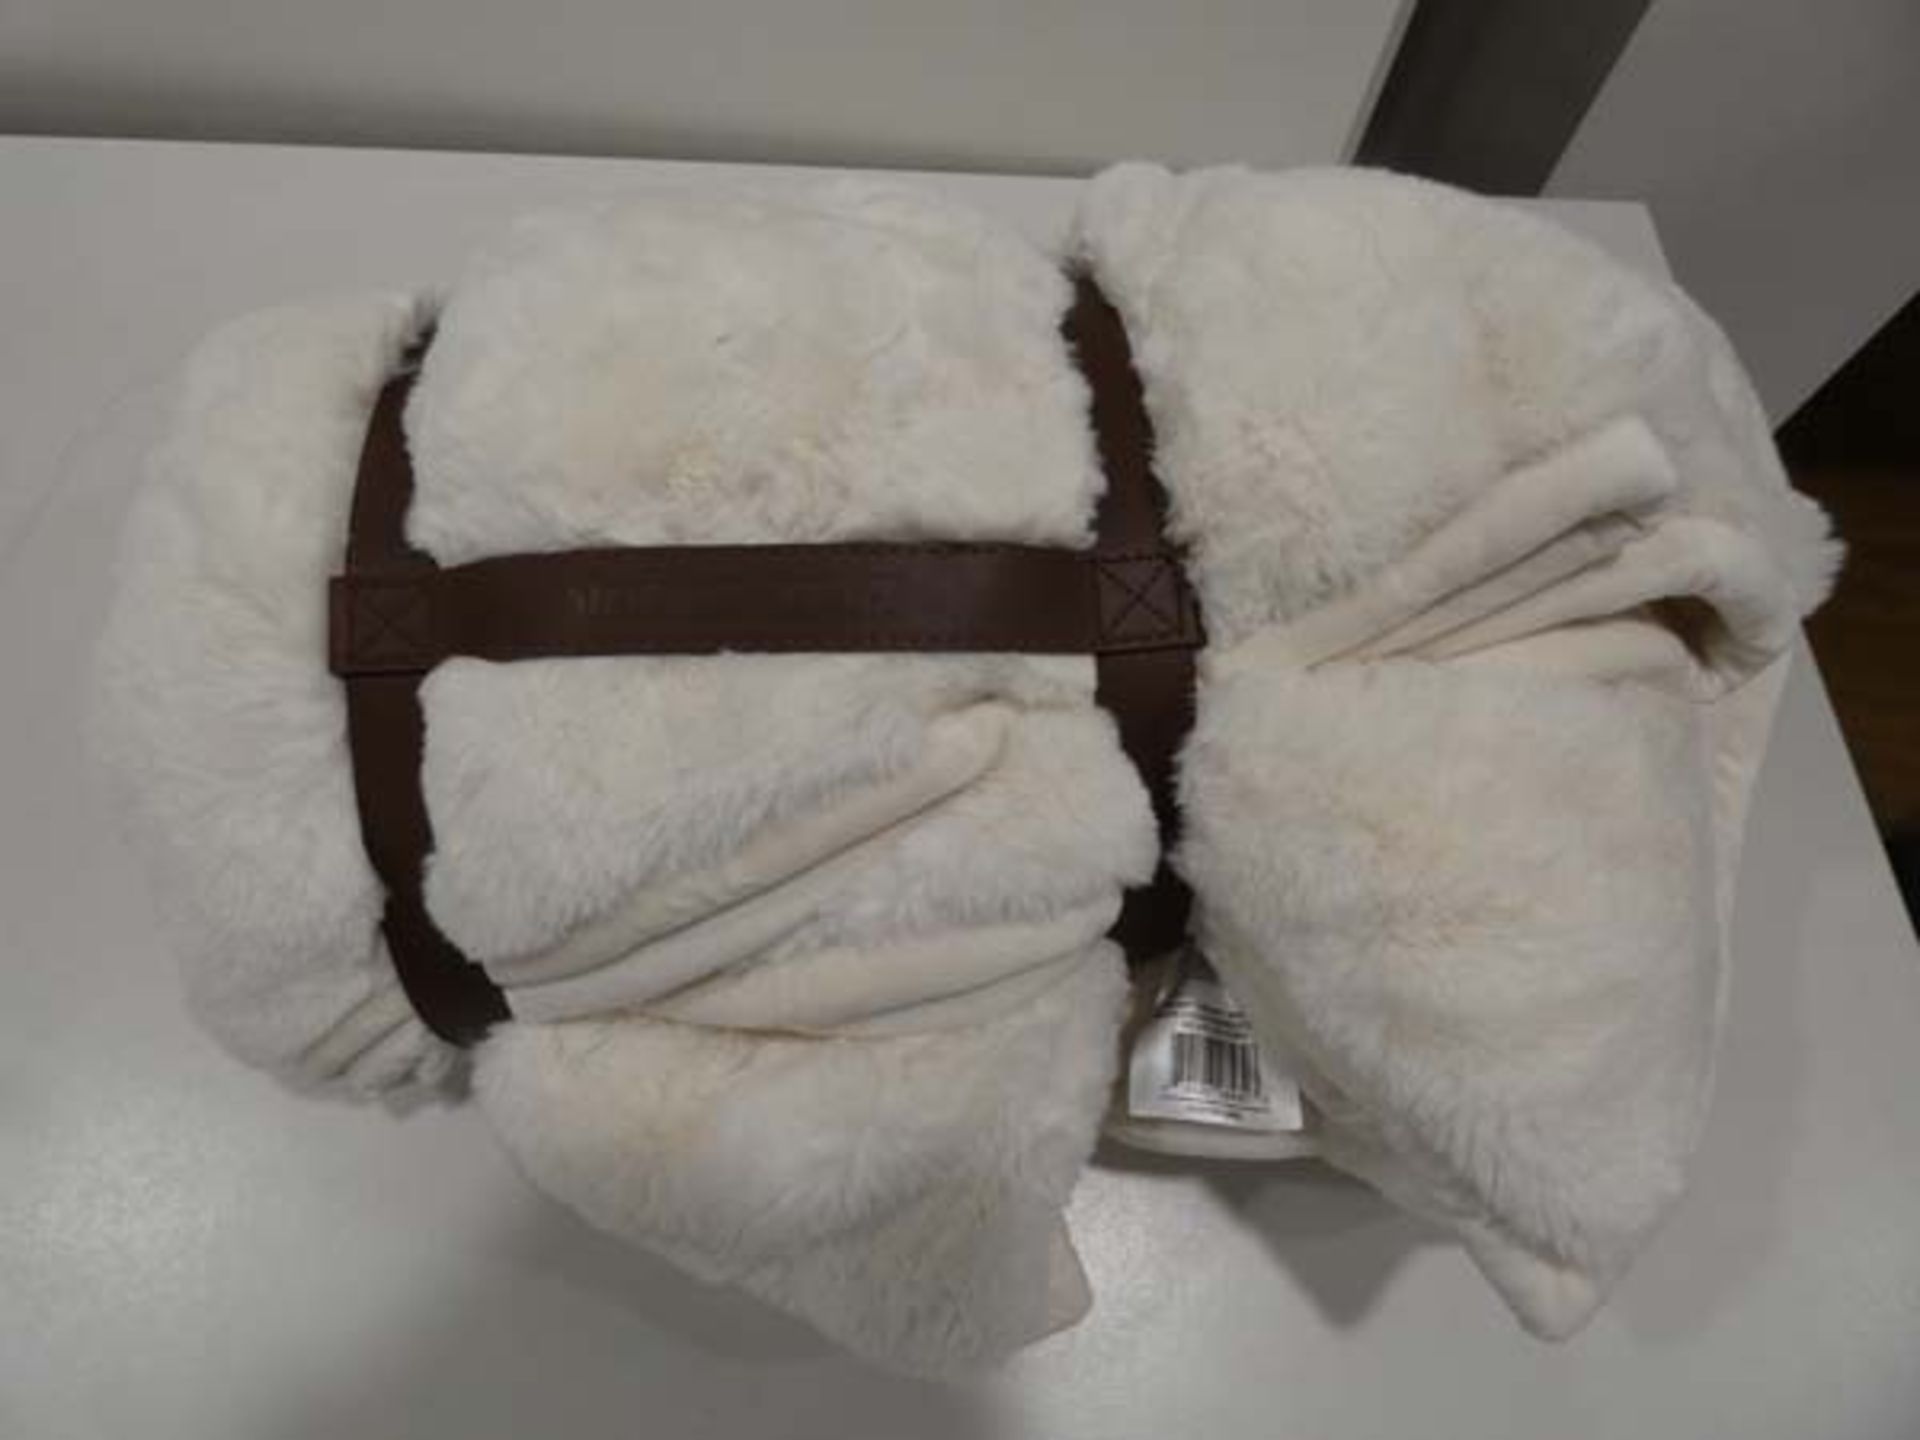 Mon Chateau luxury faux fur throw in white - Image 2 of 2